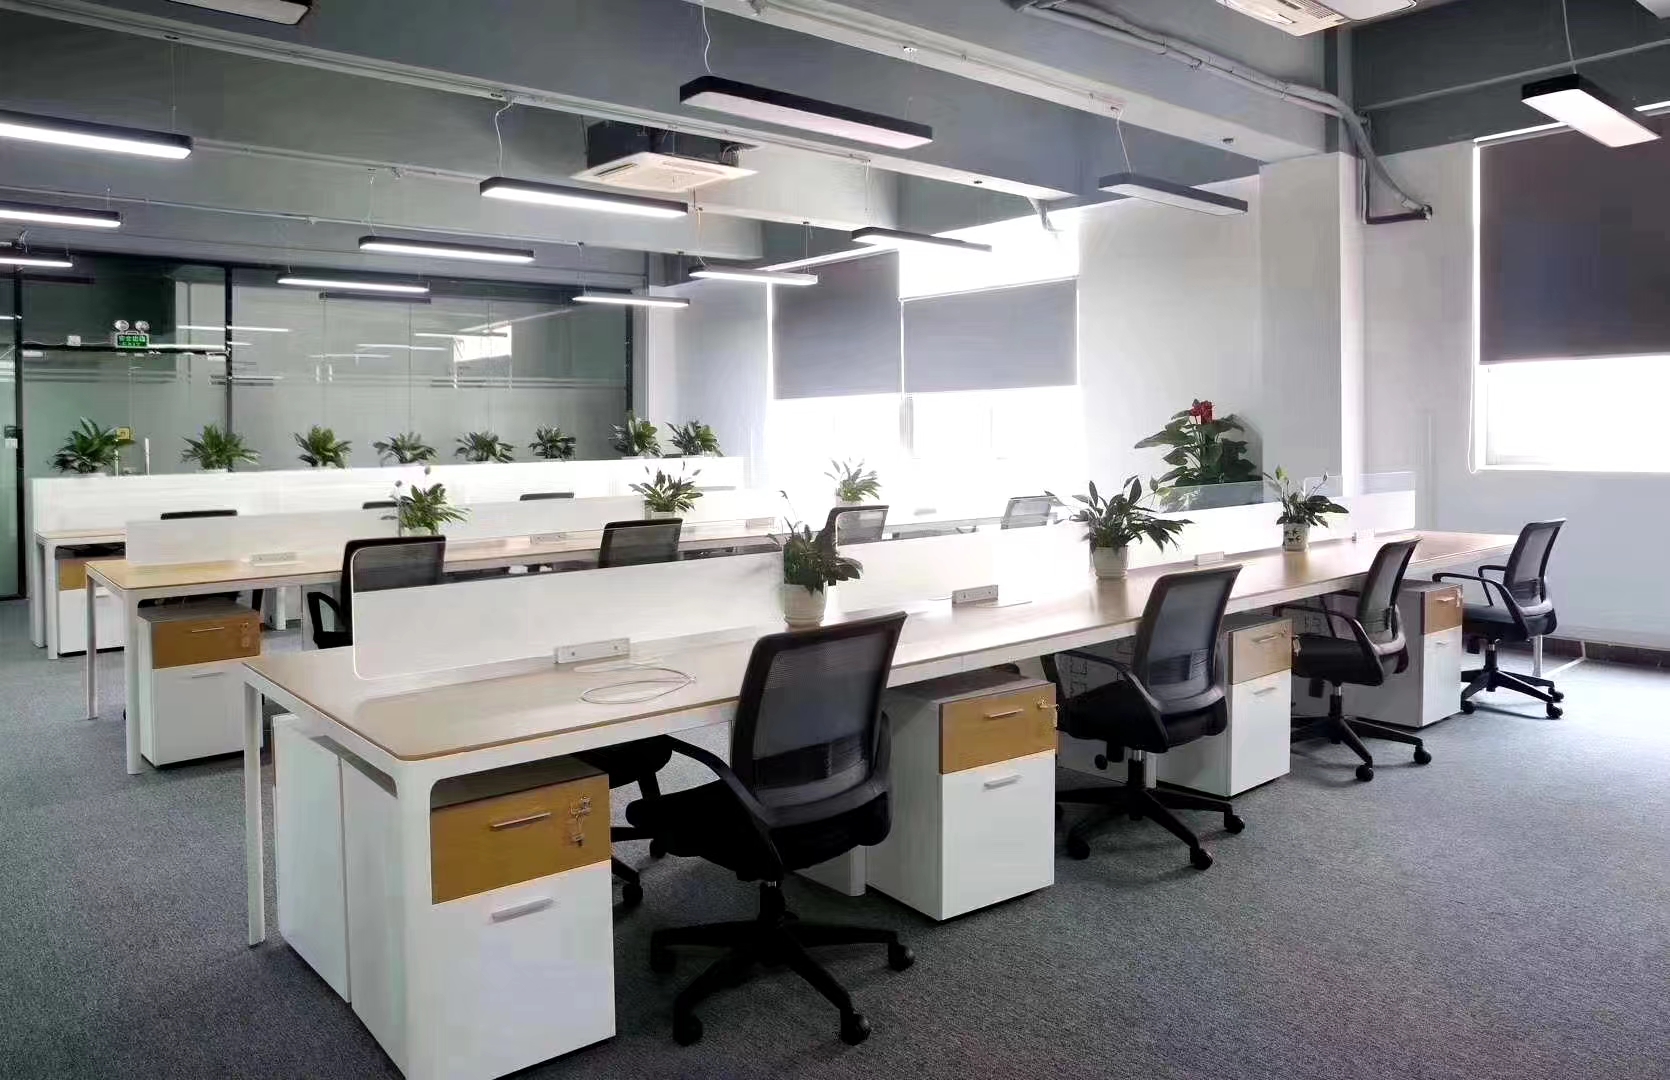 How to choose office furniture and what should we pay attention to?